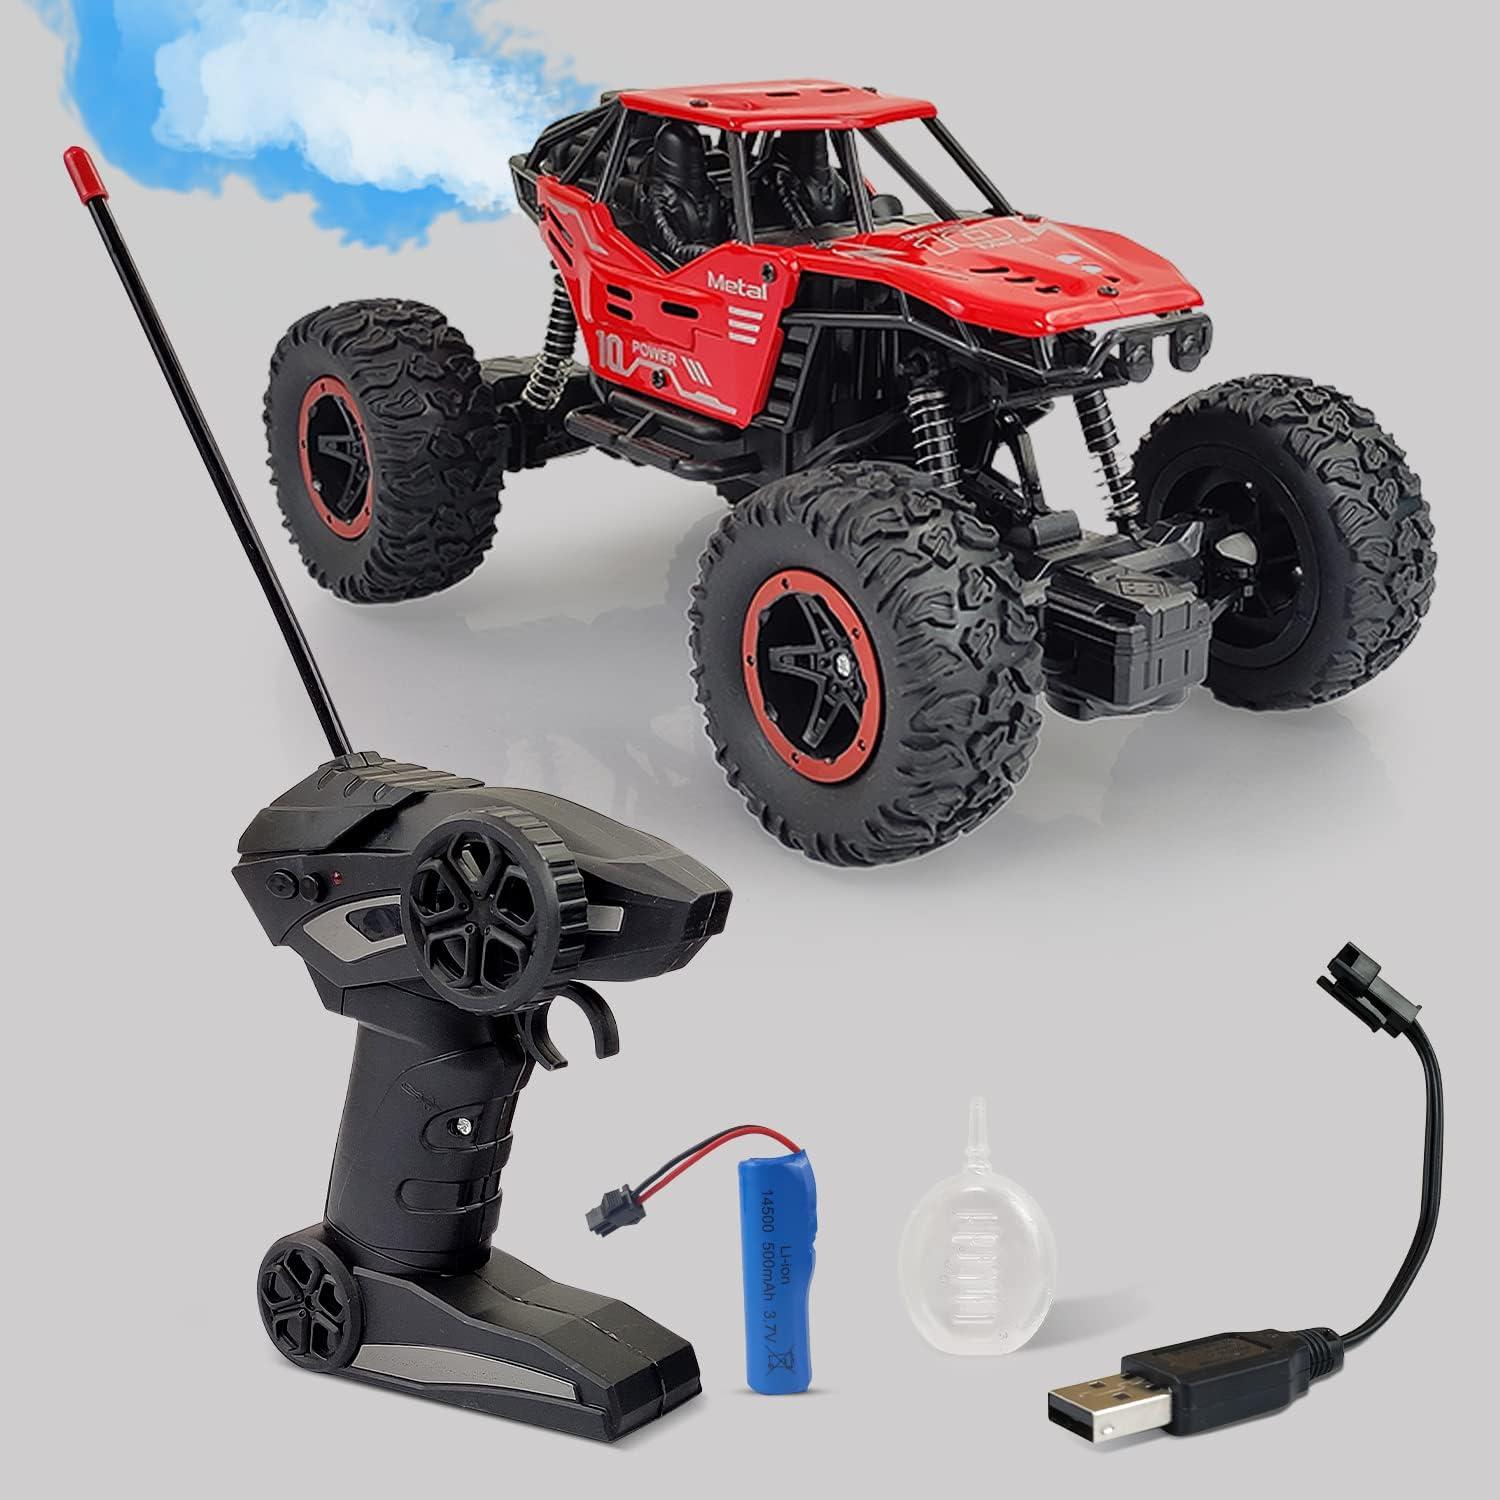 Rechargeable Monster Truck: Key Features and Specifications